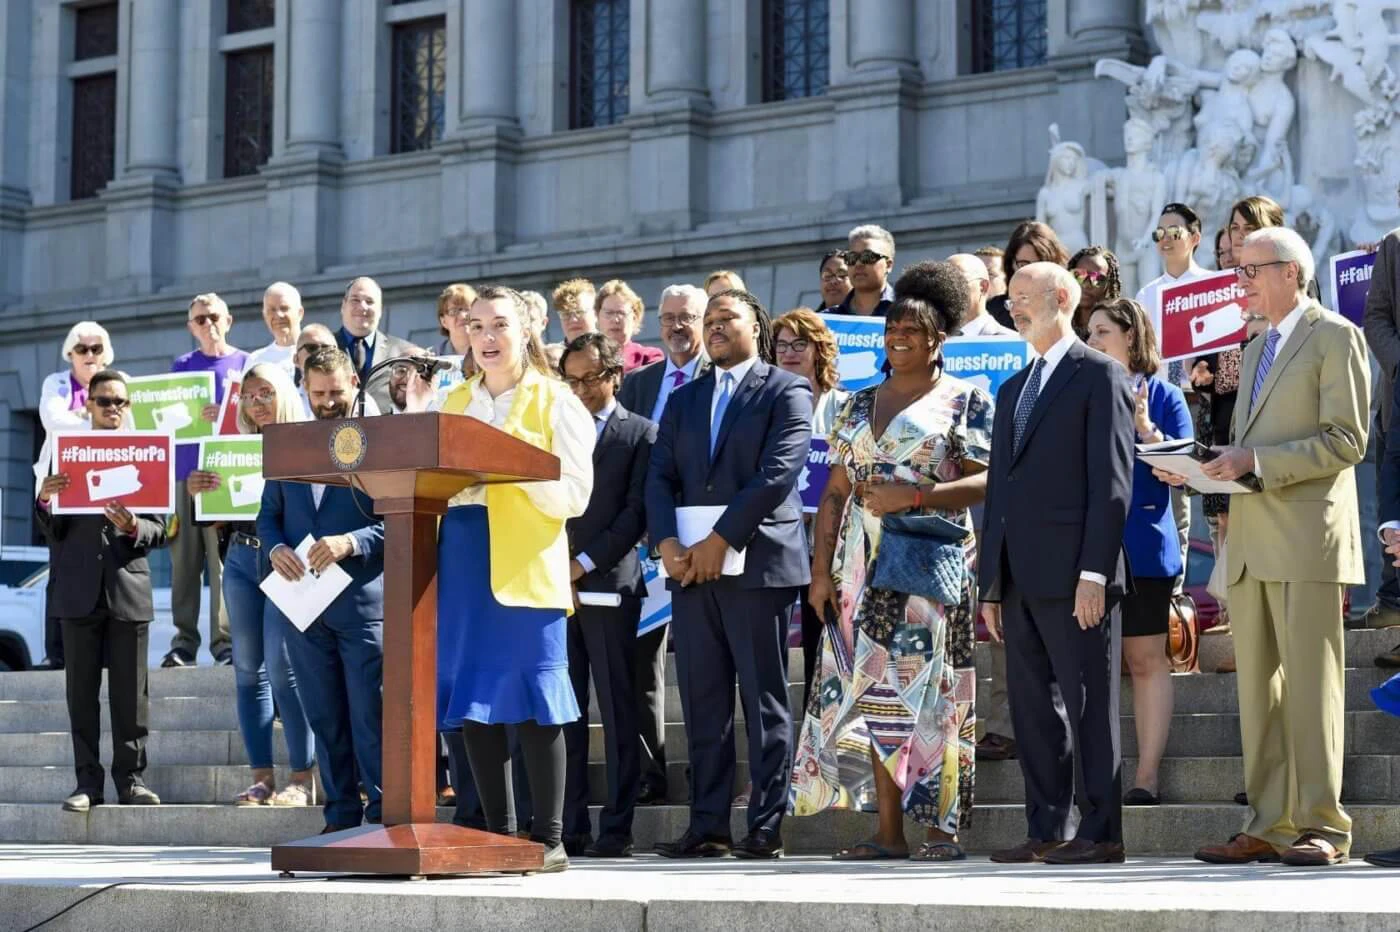 Gov. Tom Wolf and state Reps. Jessica Benham (at podium), Dan Frankel, Malcolm Kenyatta, and Brian Sims speak at a news conference to unveil the Pennsylvania Fairness Act in June. The bill, which would ban discrimination against LGBTQ communities, has been sitting in committee for months. (Courtesy of Pennsylvania House of Representatives)